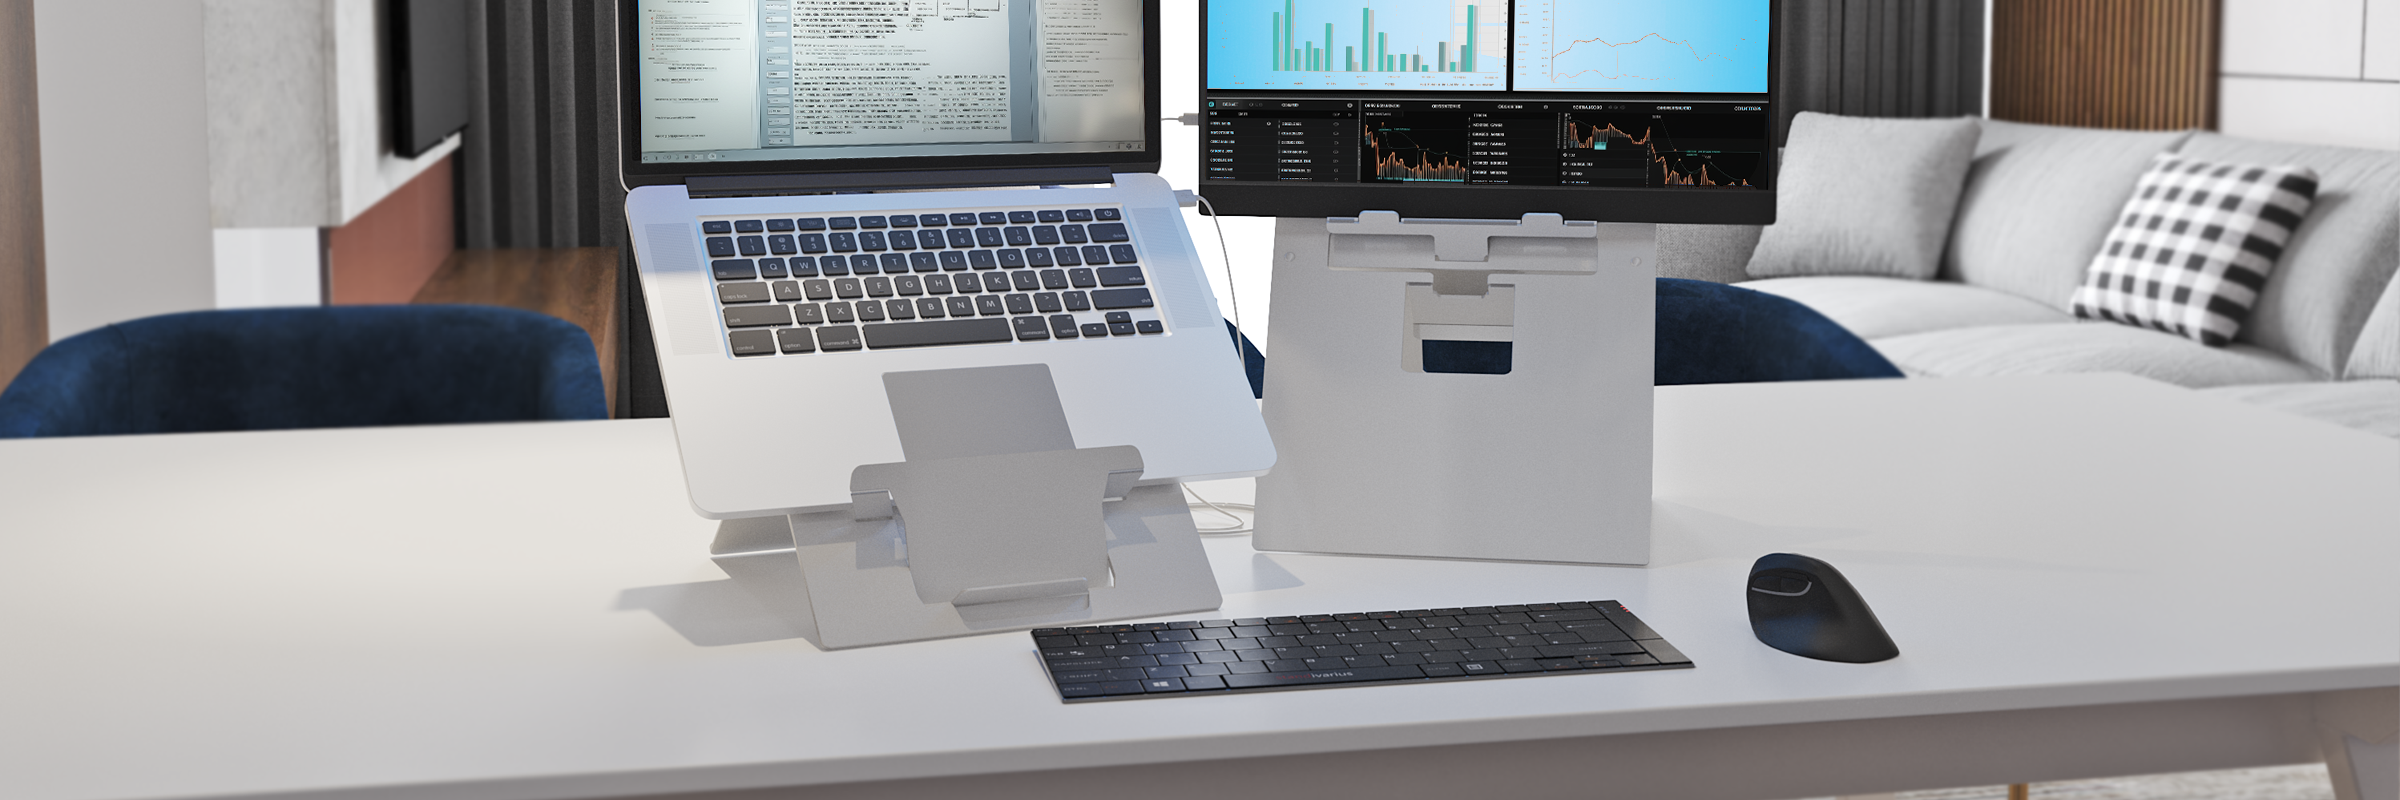 a laptop on the Standivarius Oryx evo D laptop stand beside a monitor on the Standivarius X-stand monitor stand with the Standivarius Solo x and ; both are on a home office desk